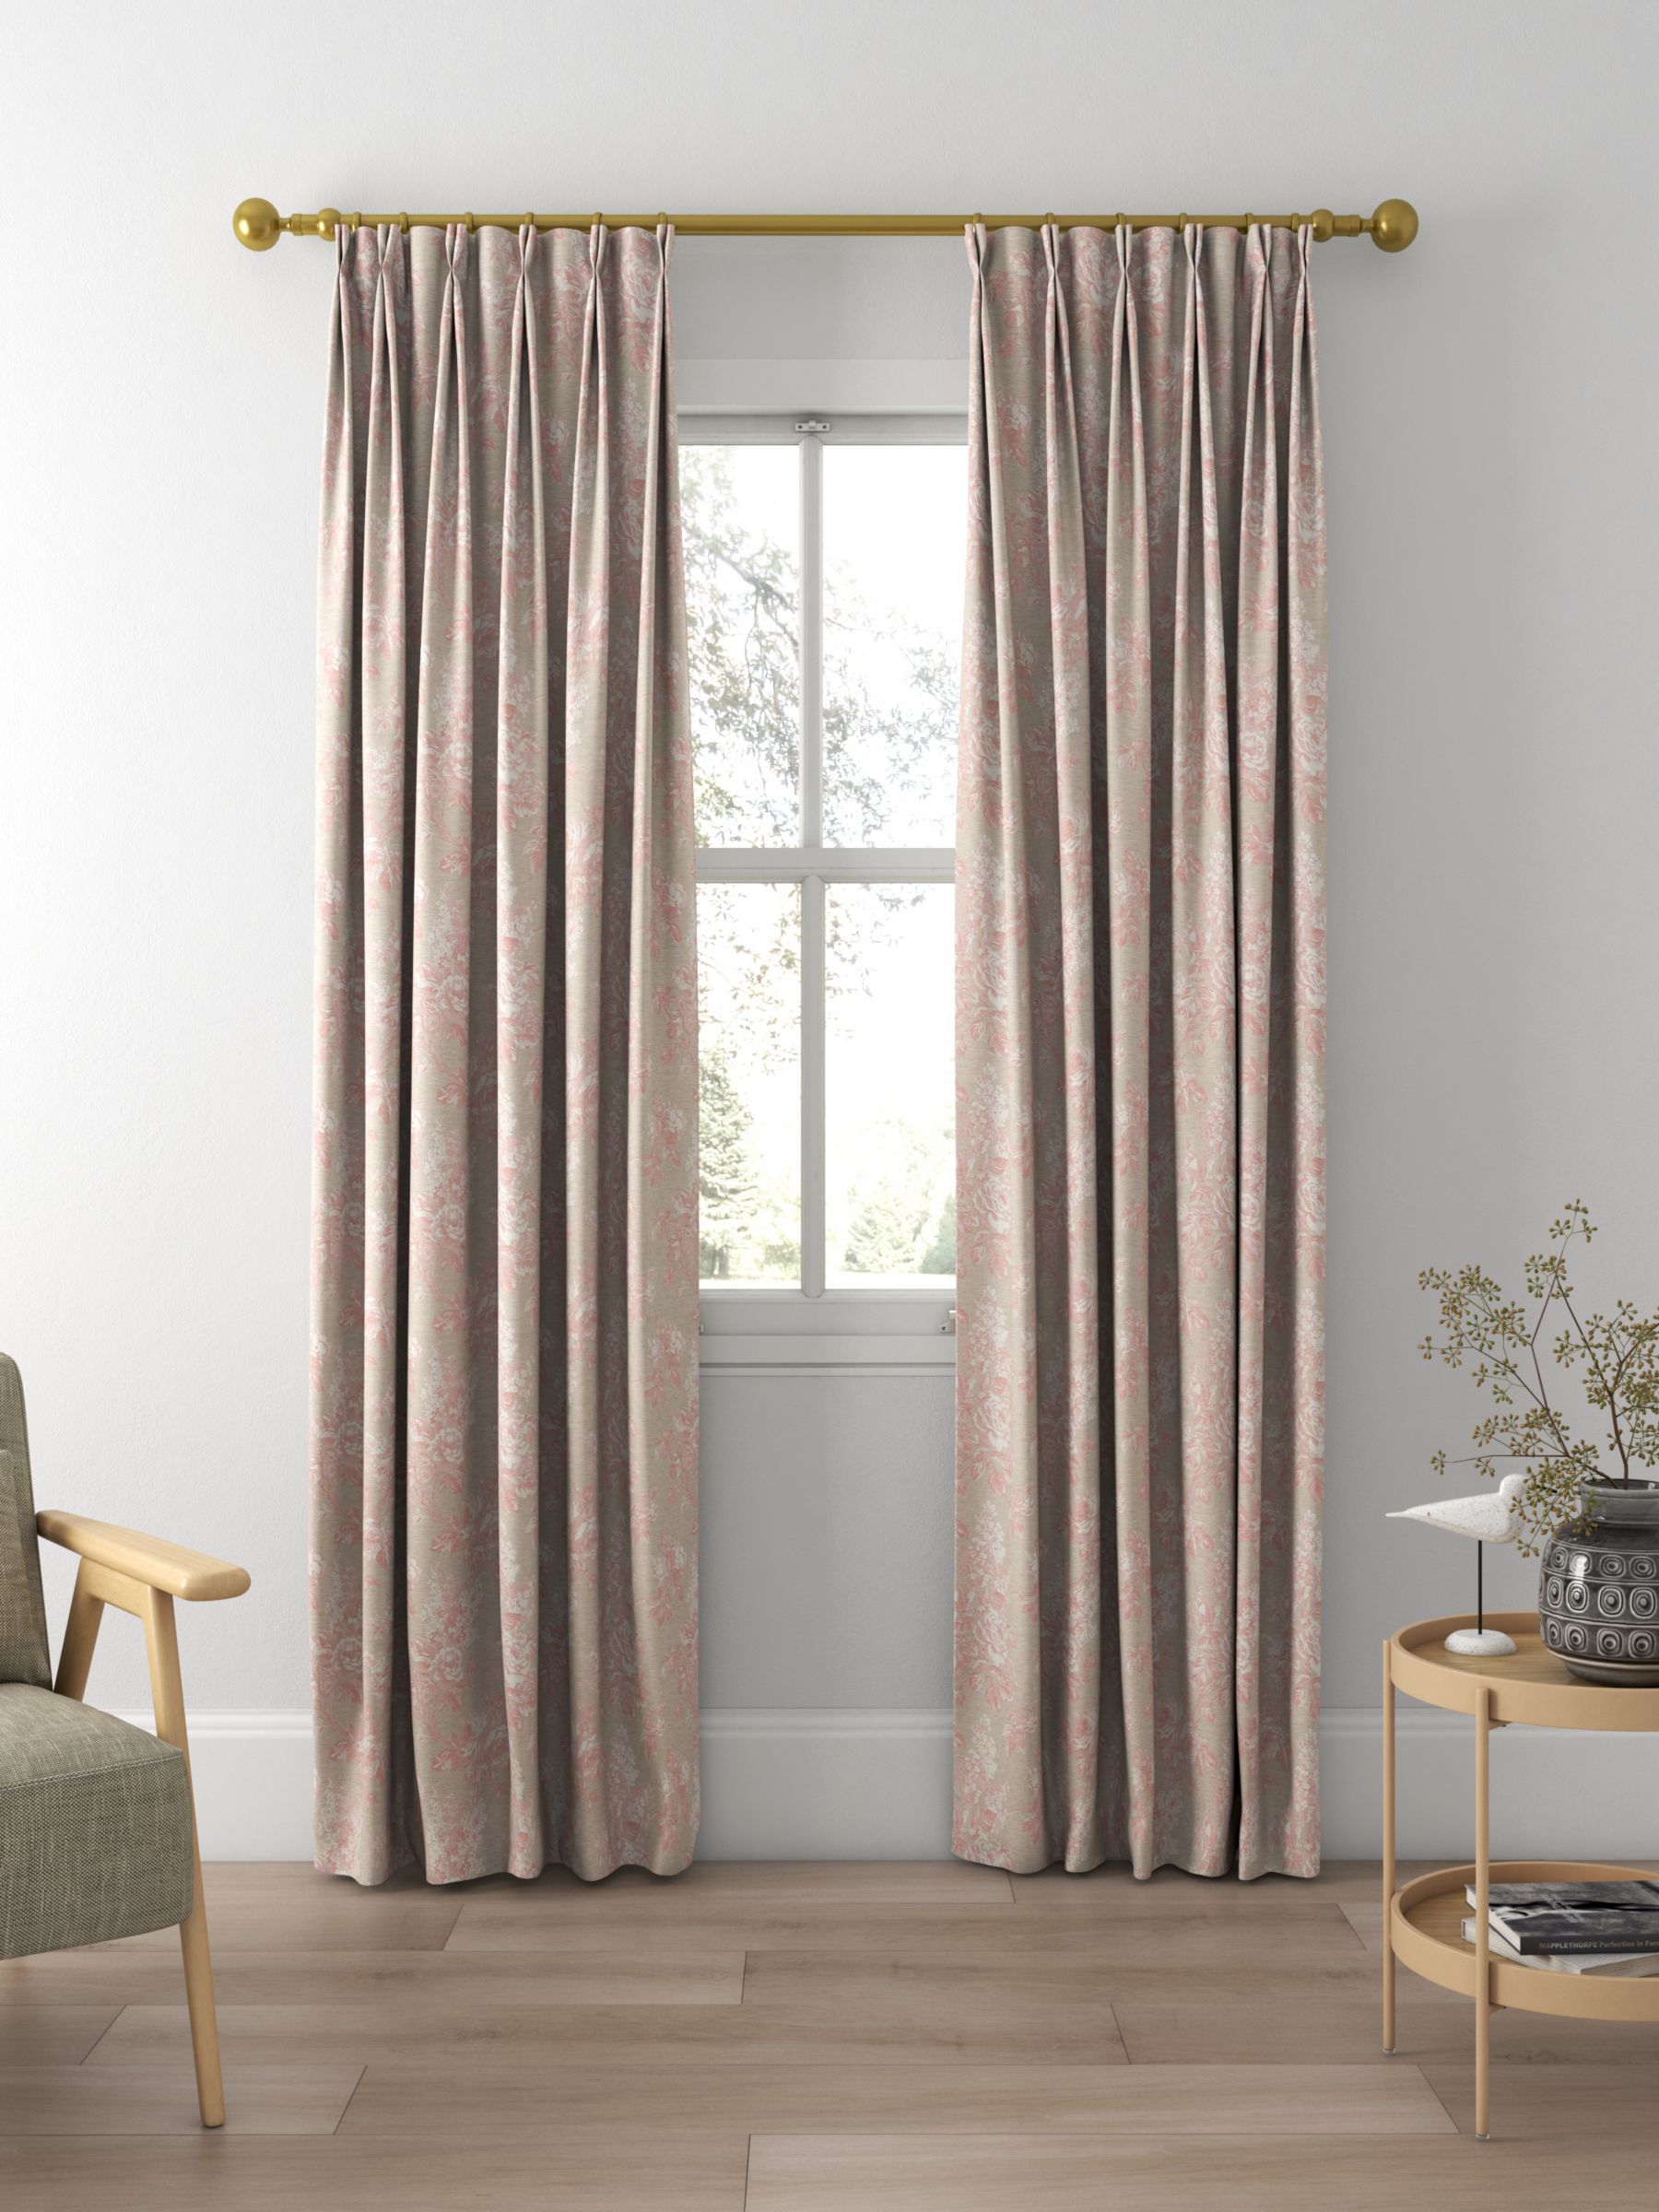 Sanderson Sorilla Damask Made to Measure Curtains, Pink/Linen